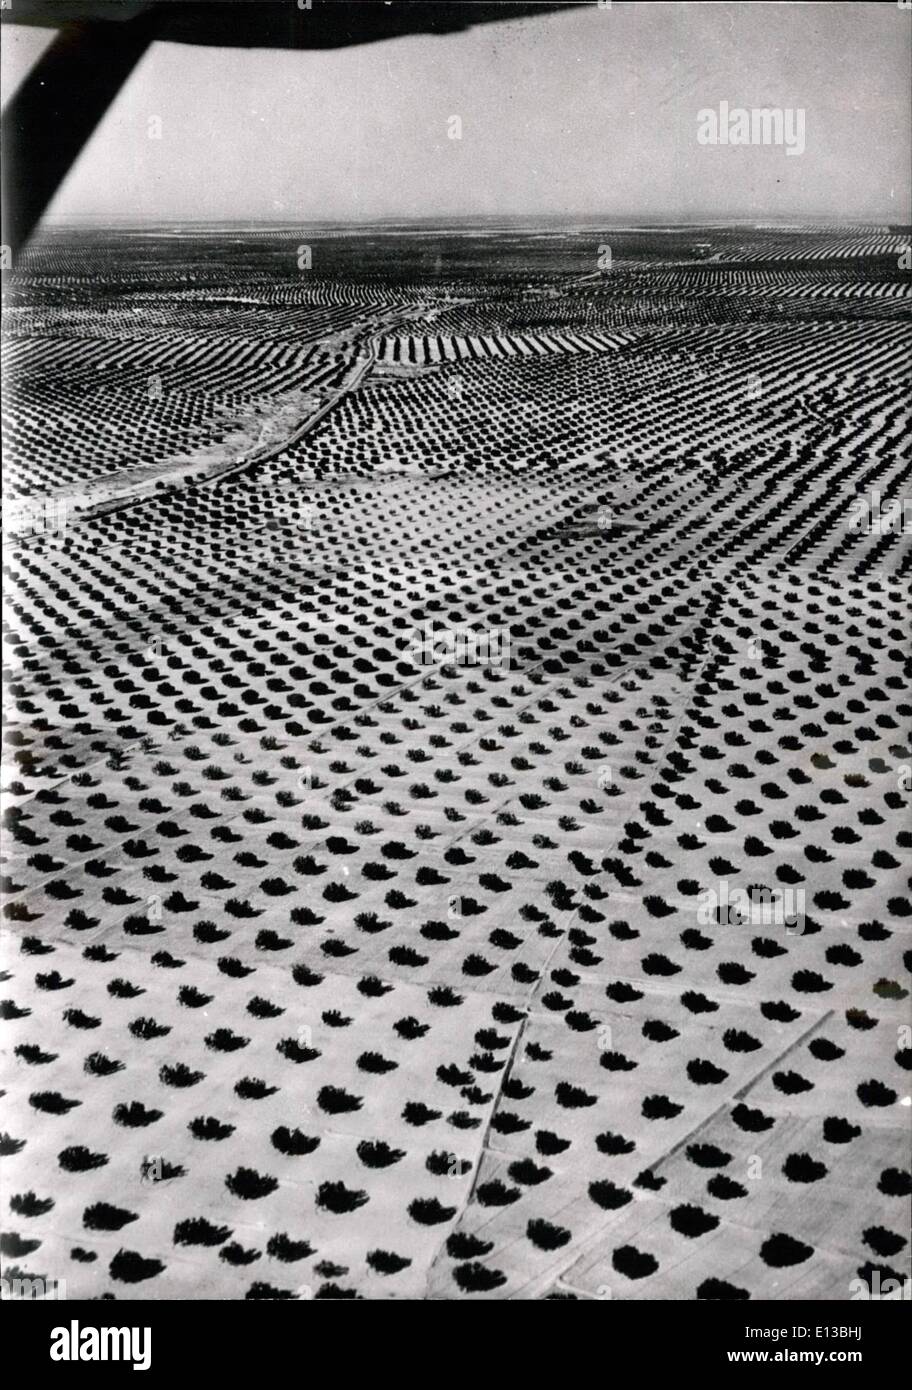 Feb. 29, 2012 - 26 million olive trees planted in desert. A view of the huge olive trees, plantation in a Tunisian desert. 45 the new plantation is expected to produce 45.000 tons of olive oil per year. Aug. 18/55 Stock Photo